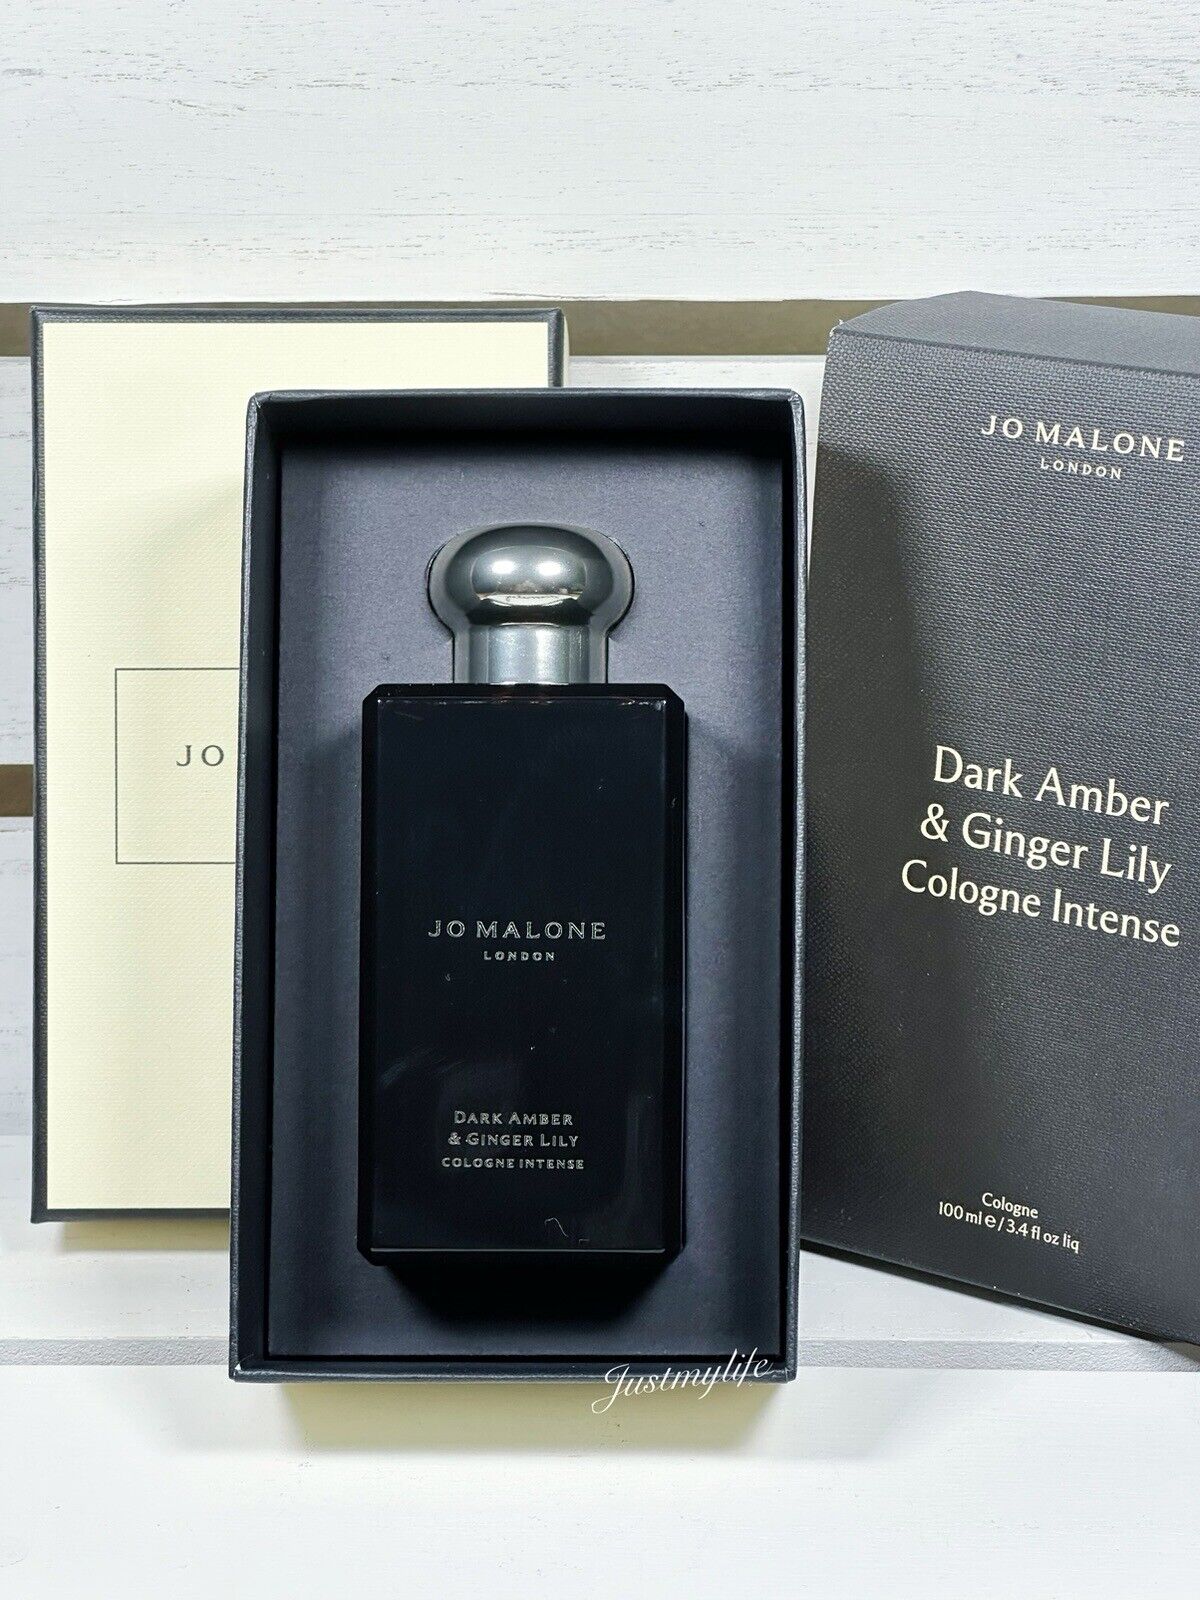 Jo Malone Dark Amber & Ginger Lily Cologne Intense,Large Size 3.4oz/100mL,NEW